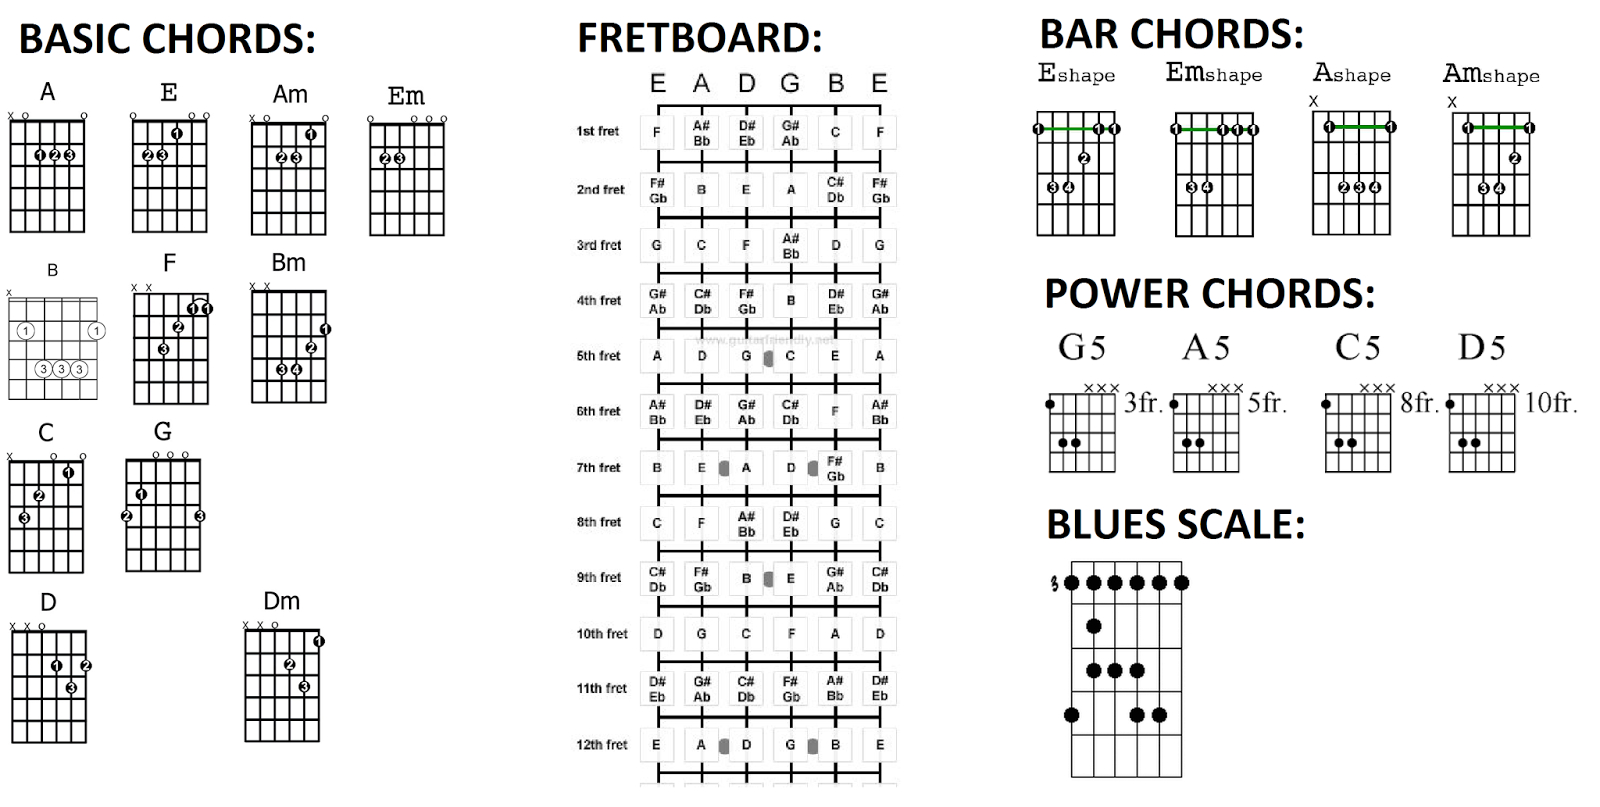 Fire Away Chords Chord Progressions Galore